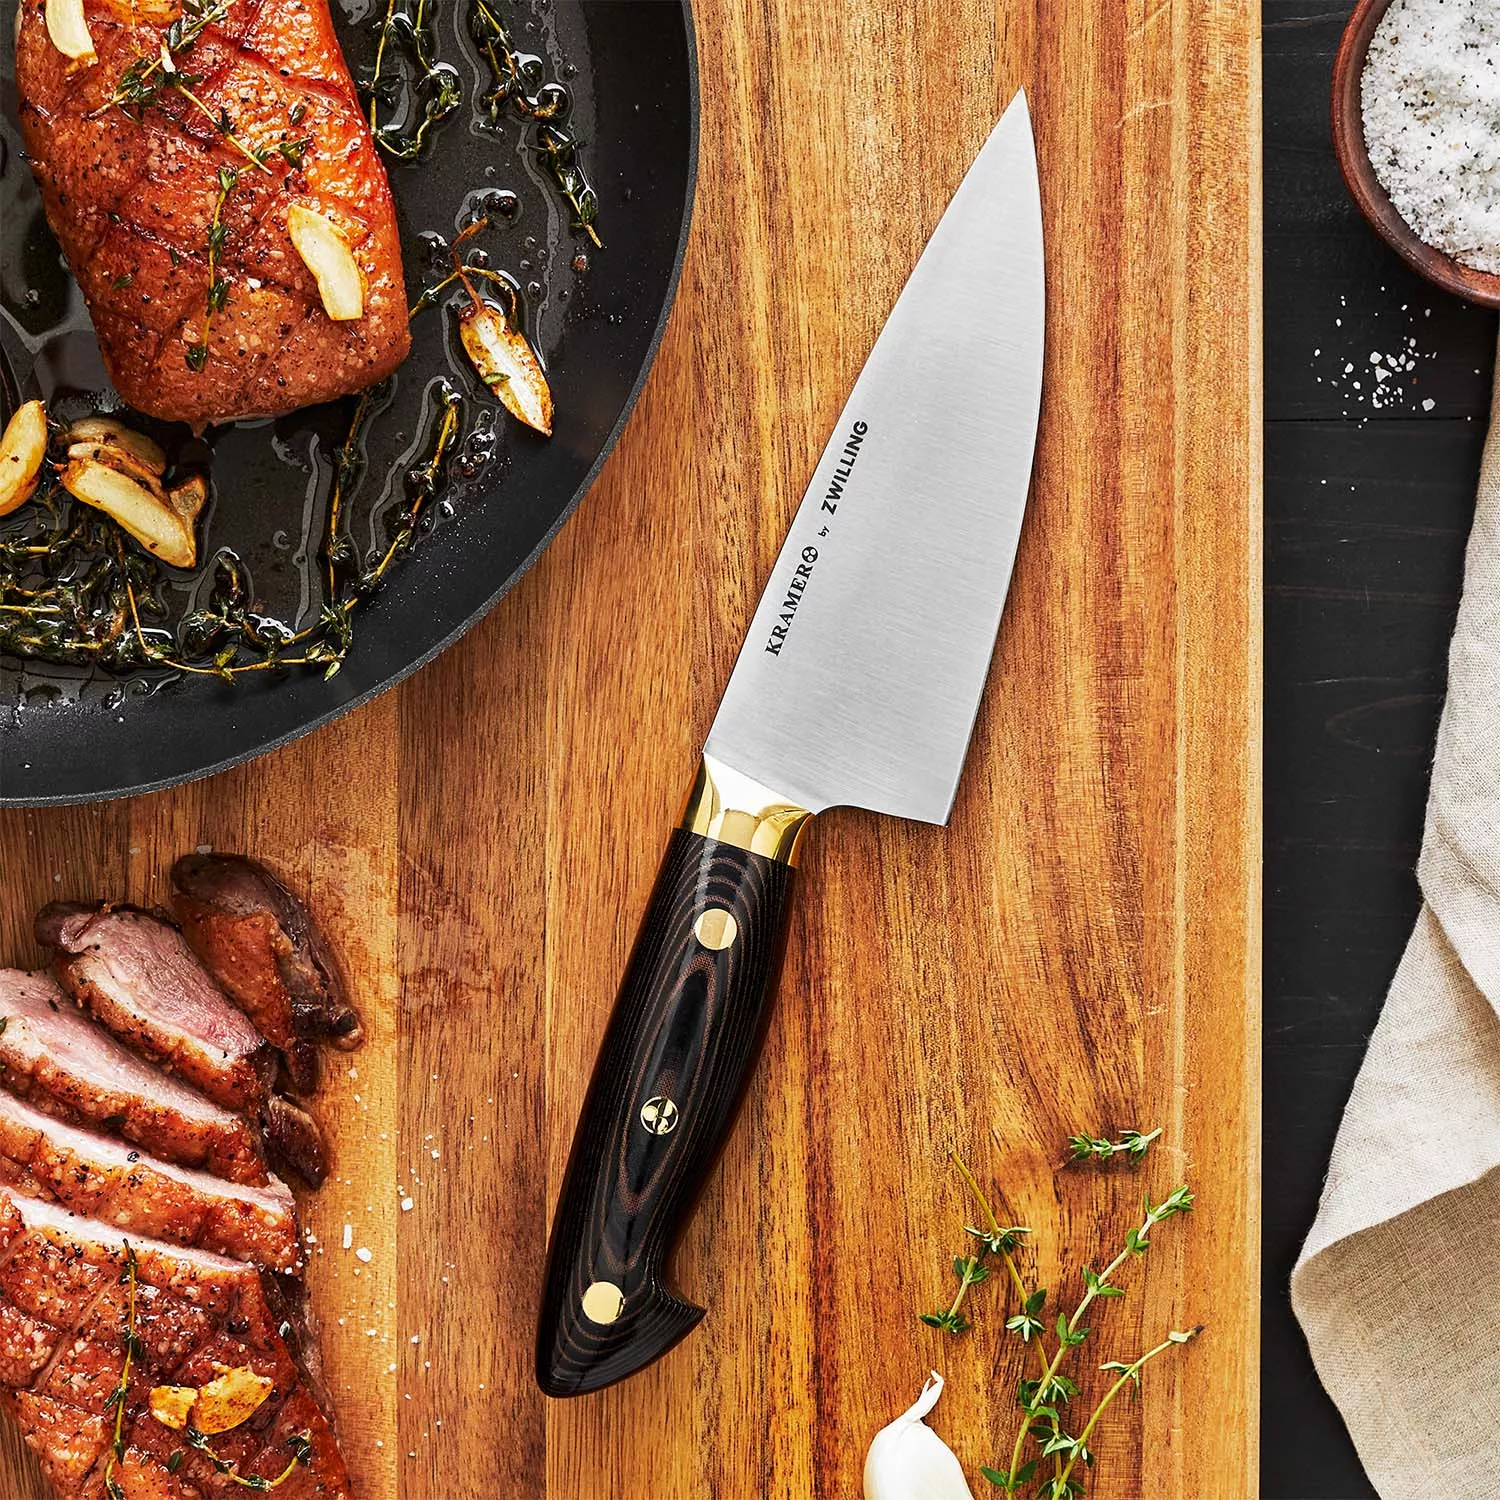 The Best Carbon Steel Knives for Chefs Who Want Super-Sharp Cuts